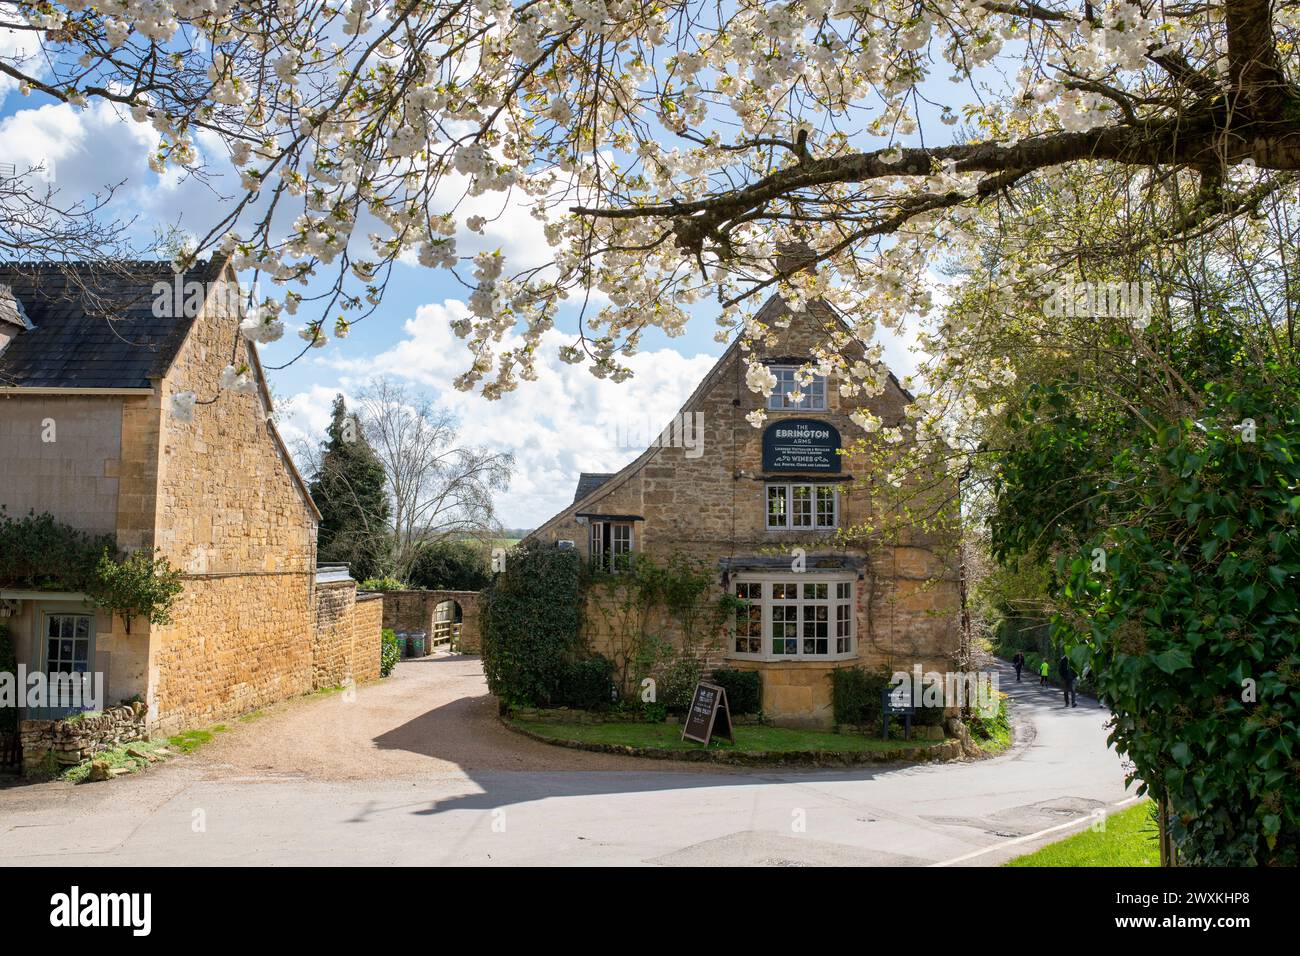 The Ebrington Arms and cherry tree blossom in spring. Ebrington, Chipping Campden, Gloucestershire, England Stock Photo